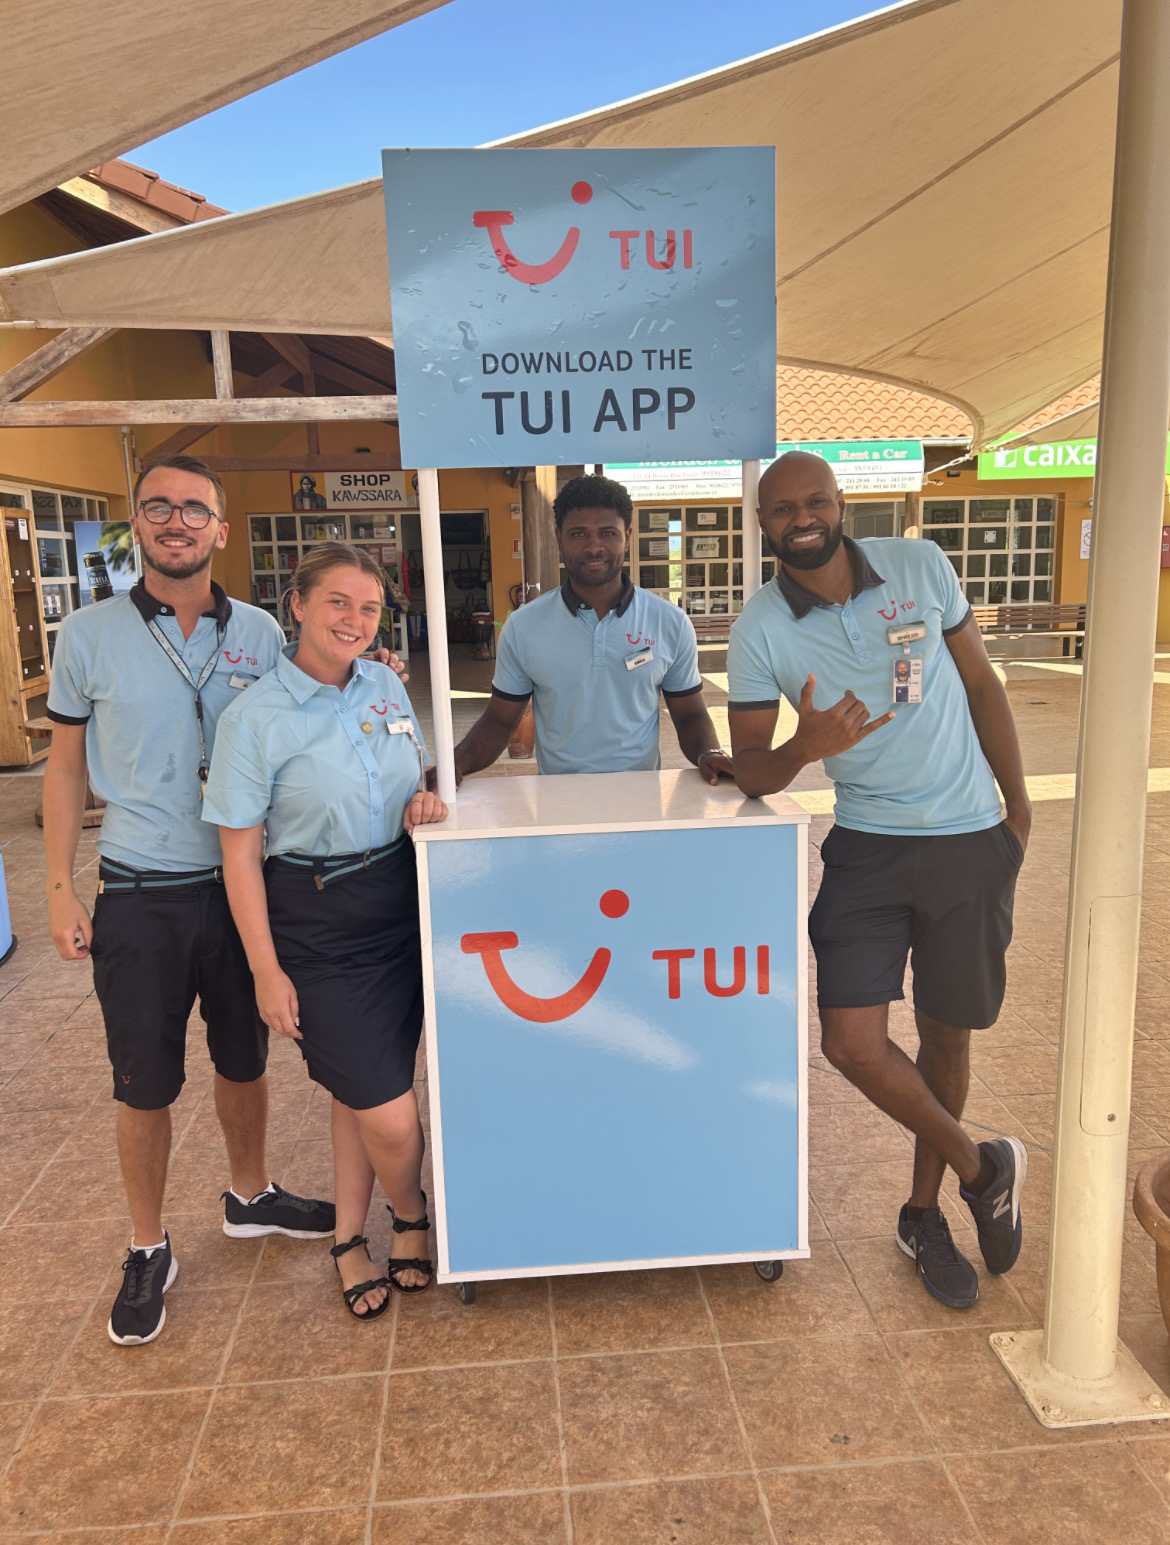 A group of 4 reps standing behind a TUI desk at an airport. They are all wearing uniform smiling at the camera. You can see the airport terminal in the background.